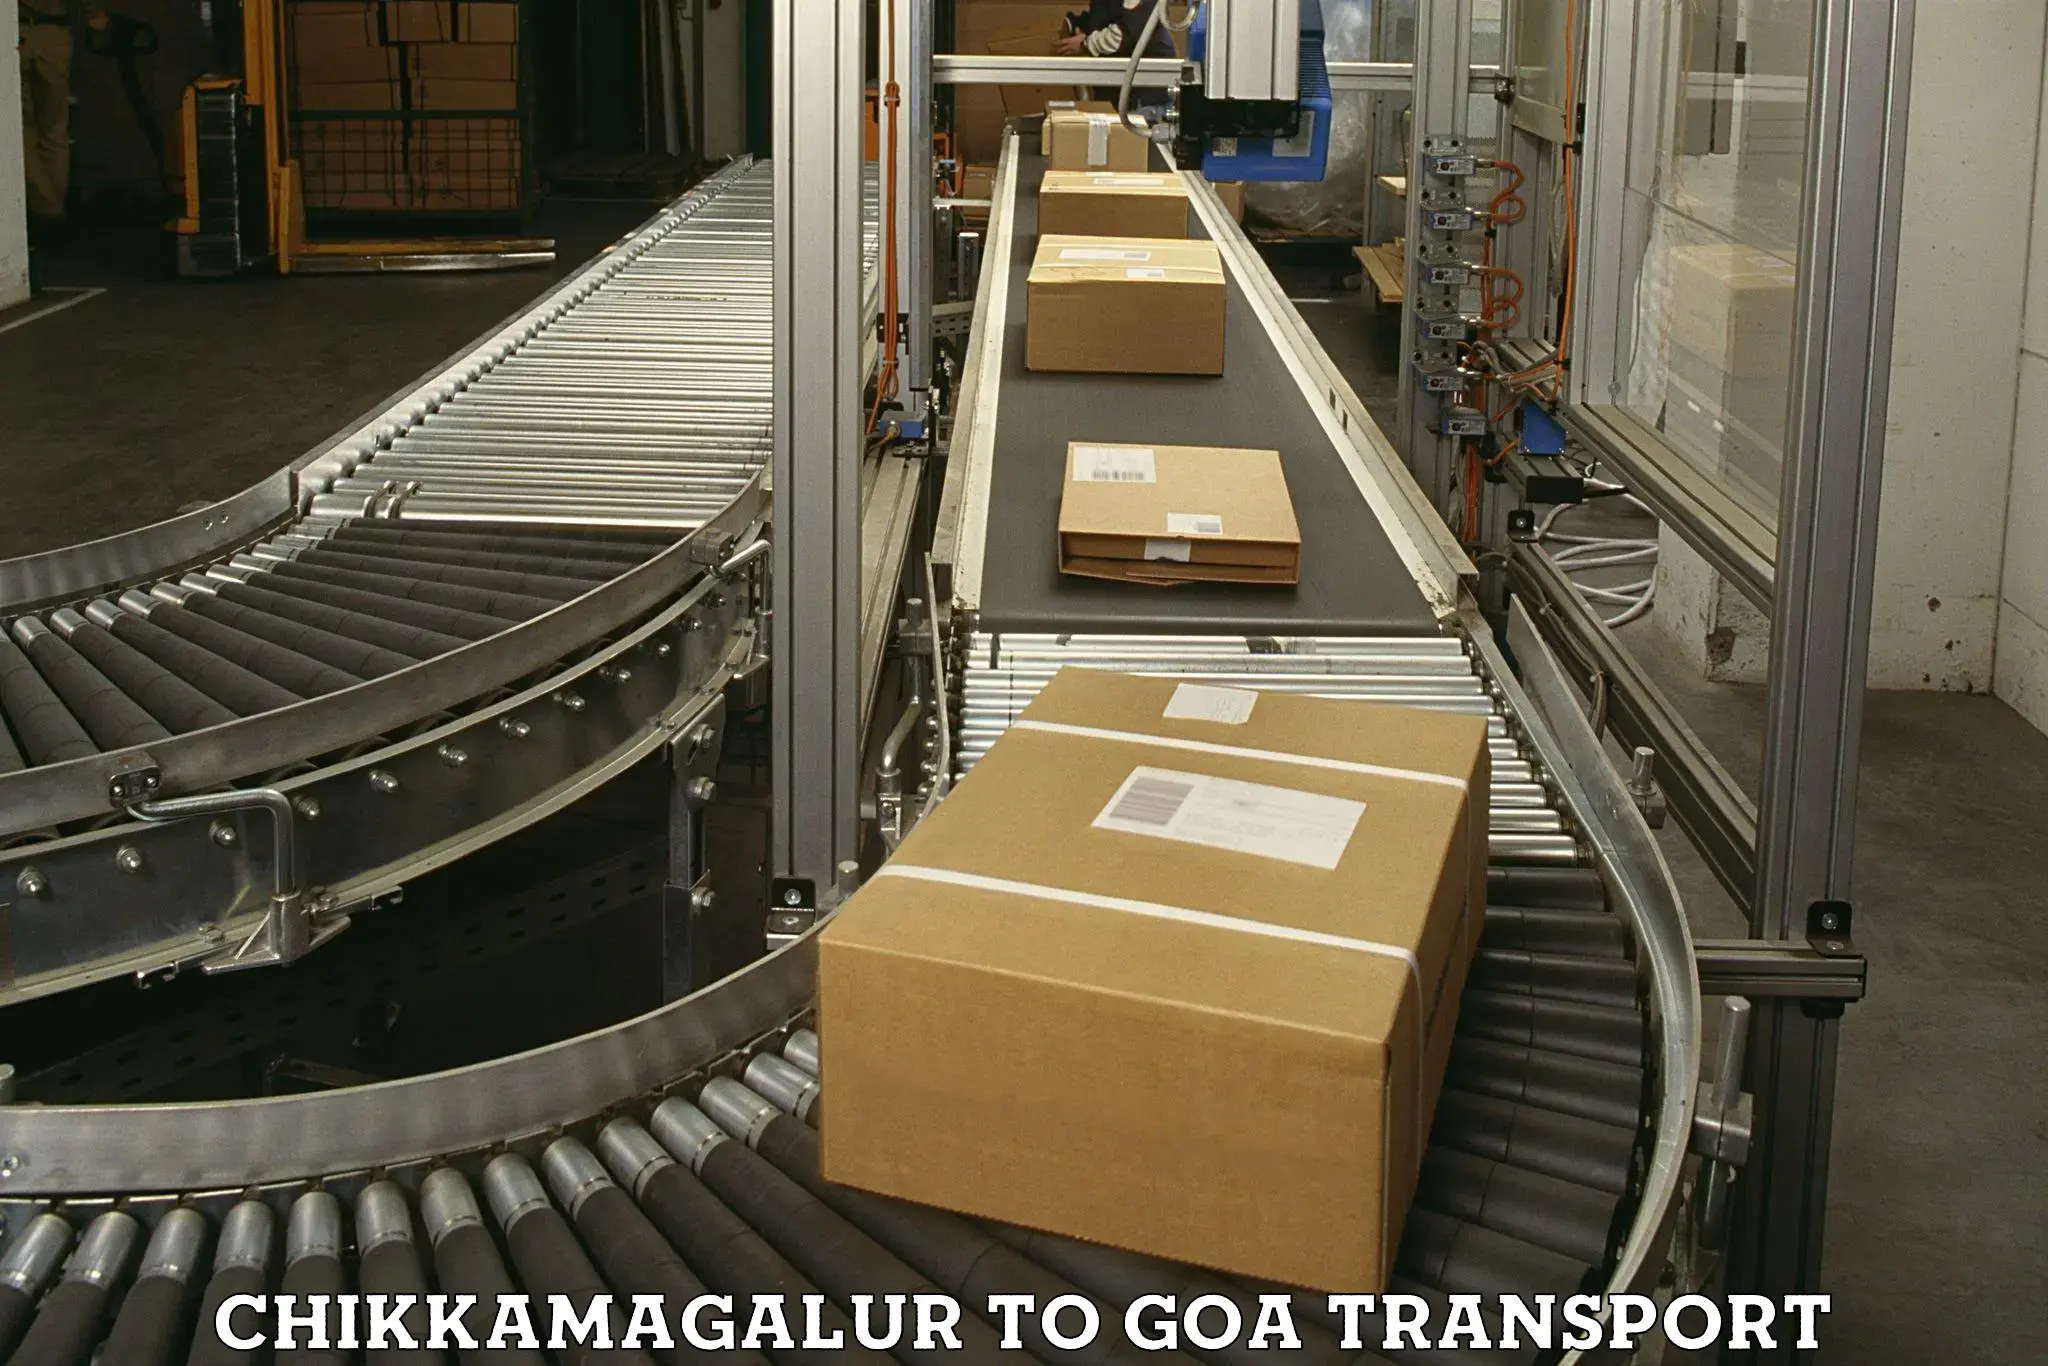 Commercial transport service in Chikkamagalur to IIT Goa